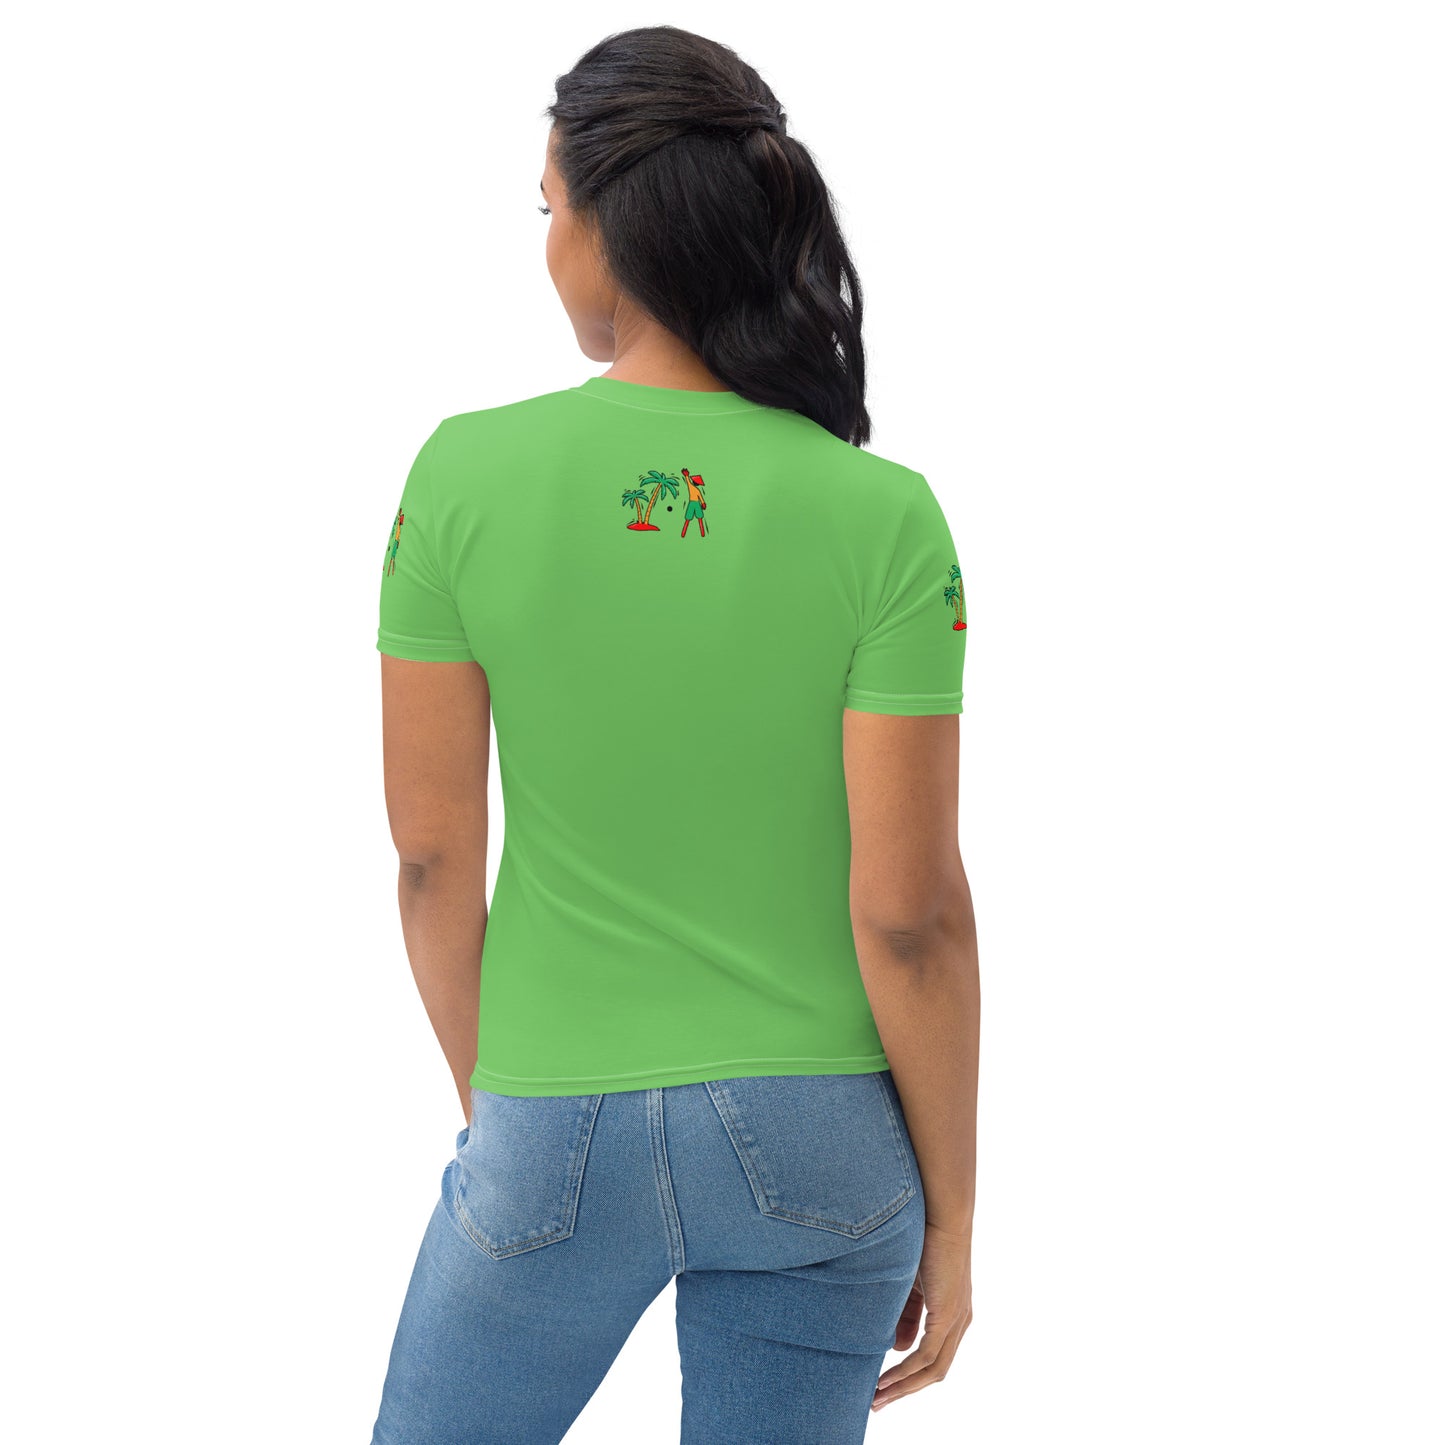 Green V.Localized (Ice/Gold/Green) Women's Dry-Fit T-Shirt